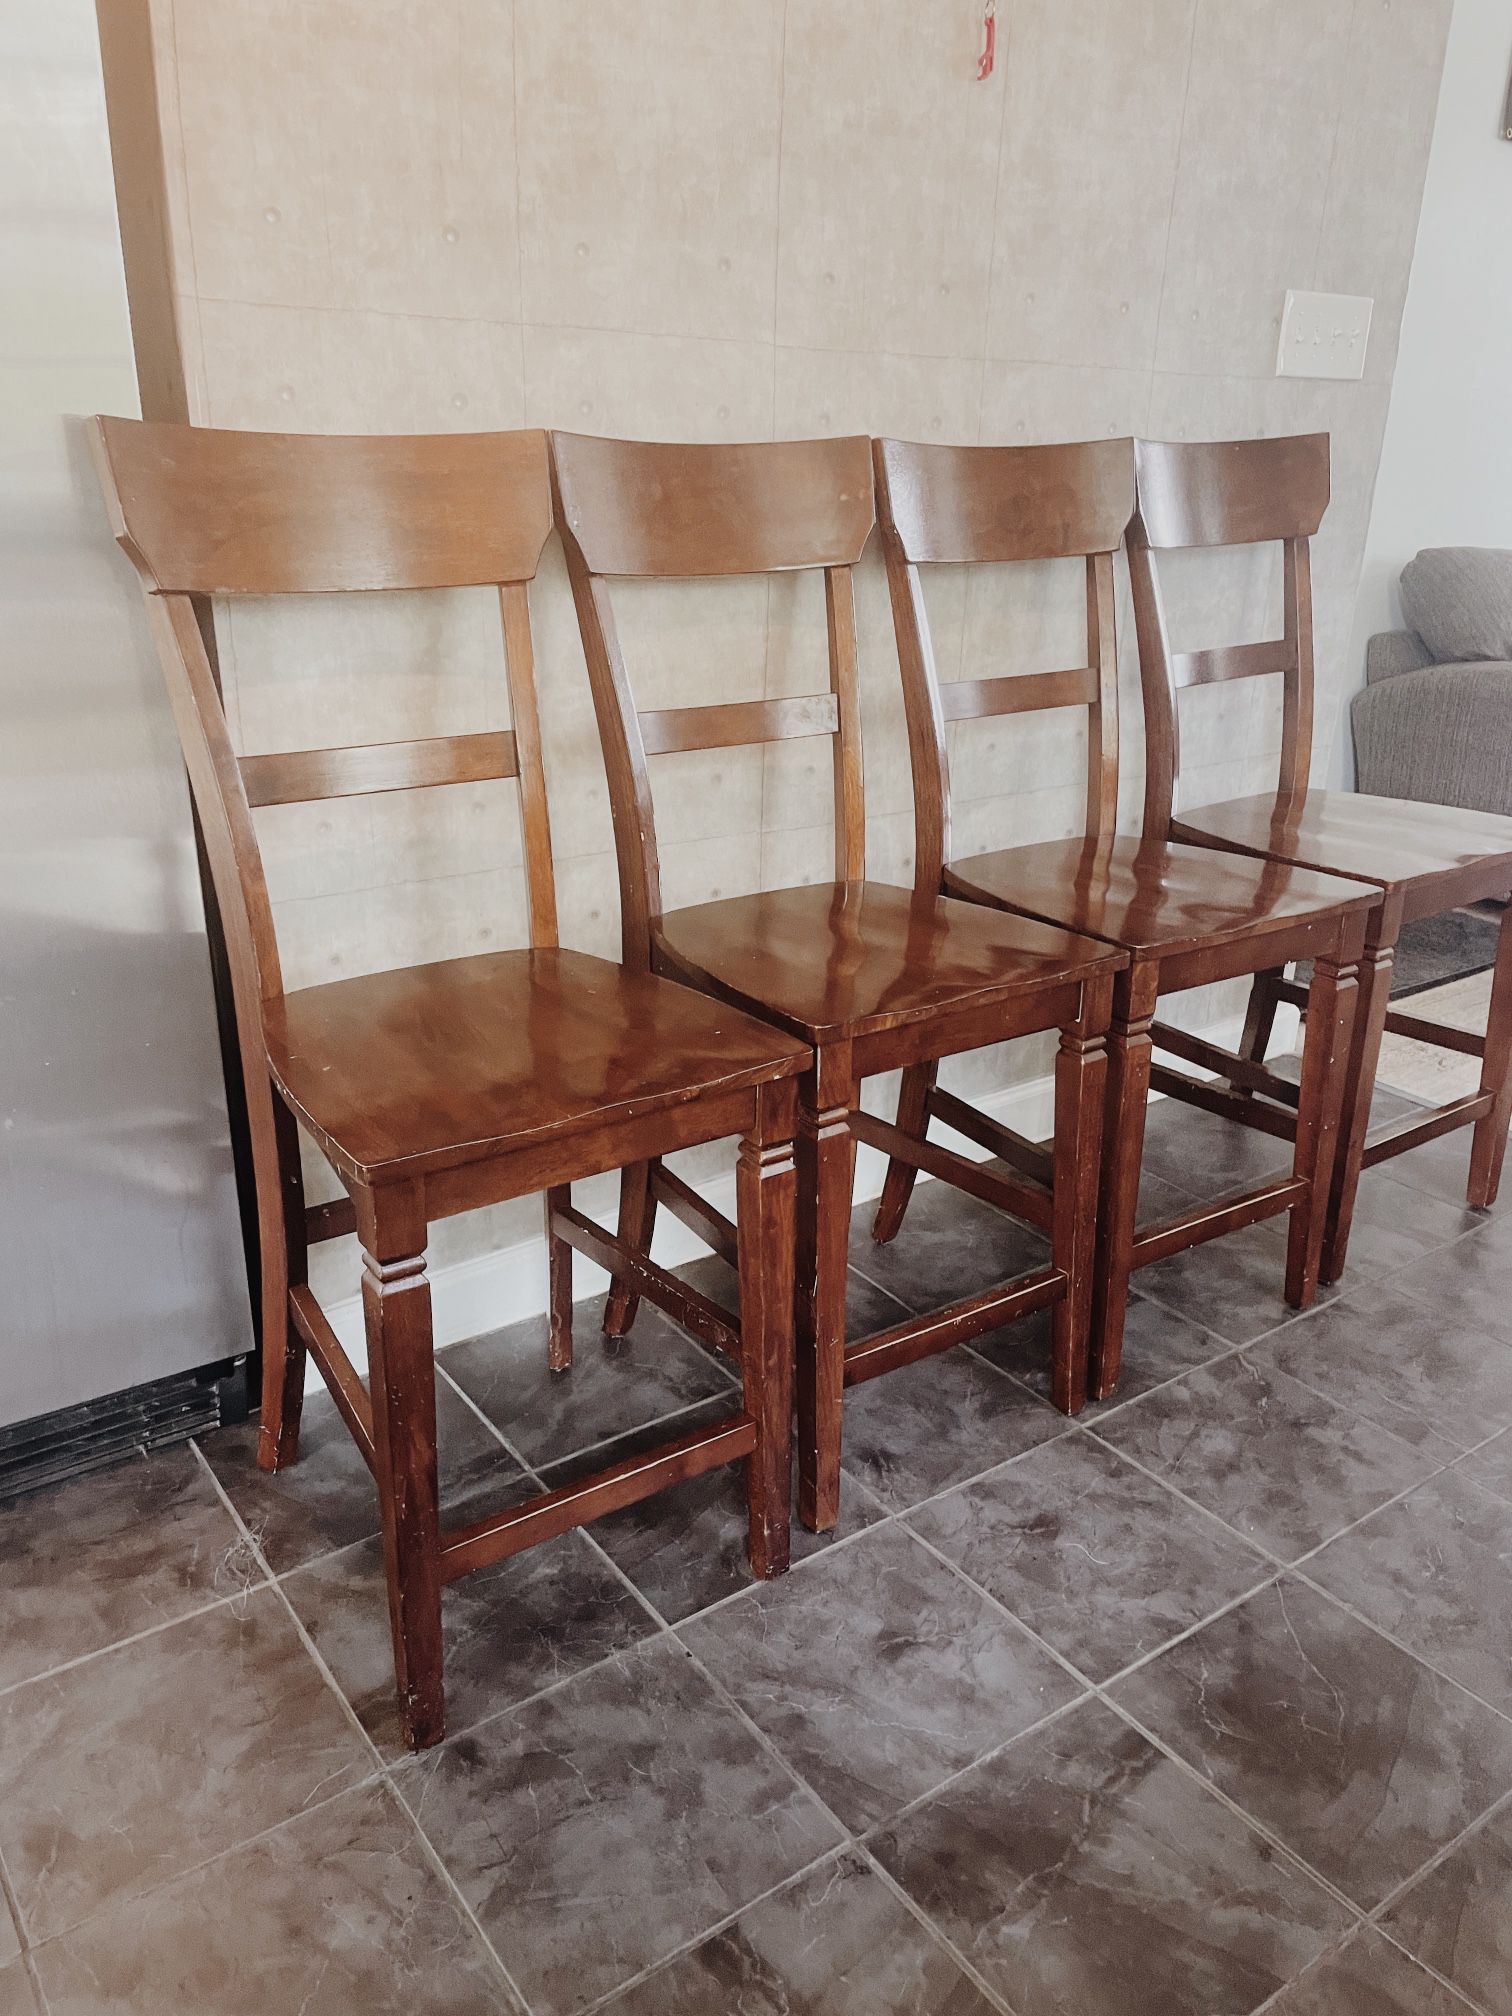 FREE DELIVERY! Set Of 4 Higher Top Wooden Chairs